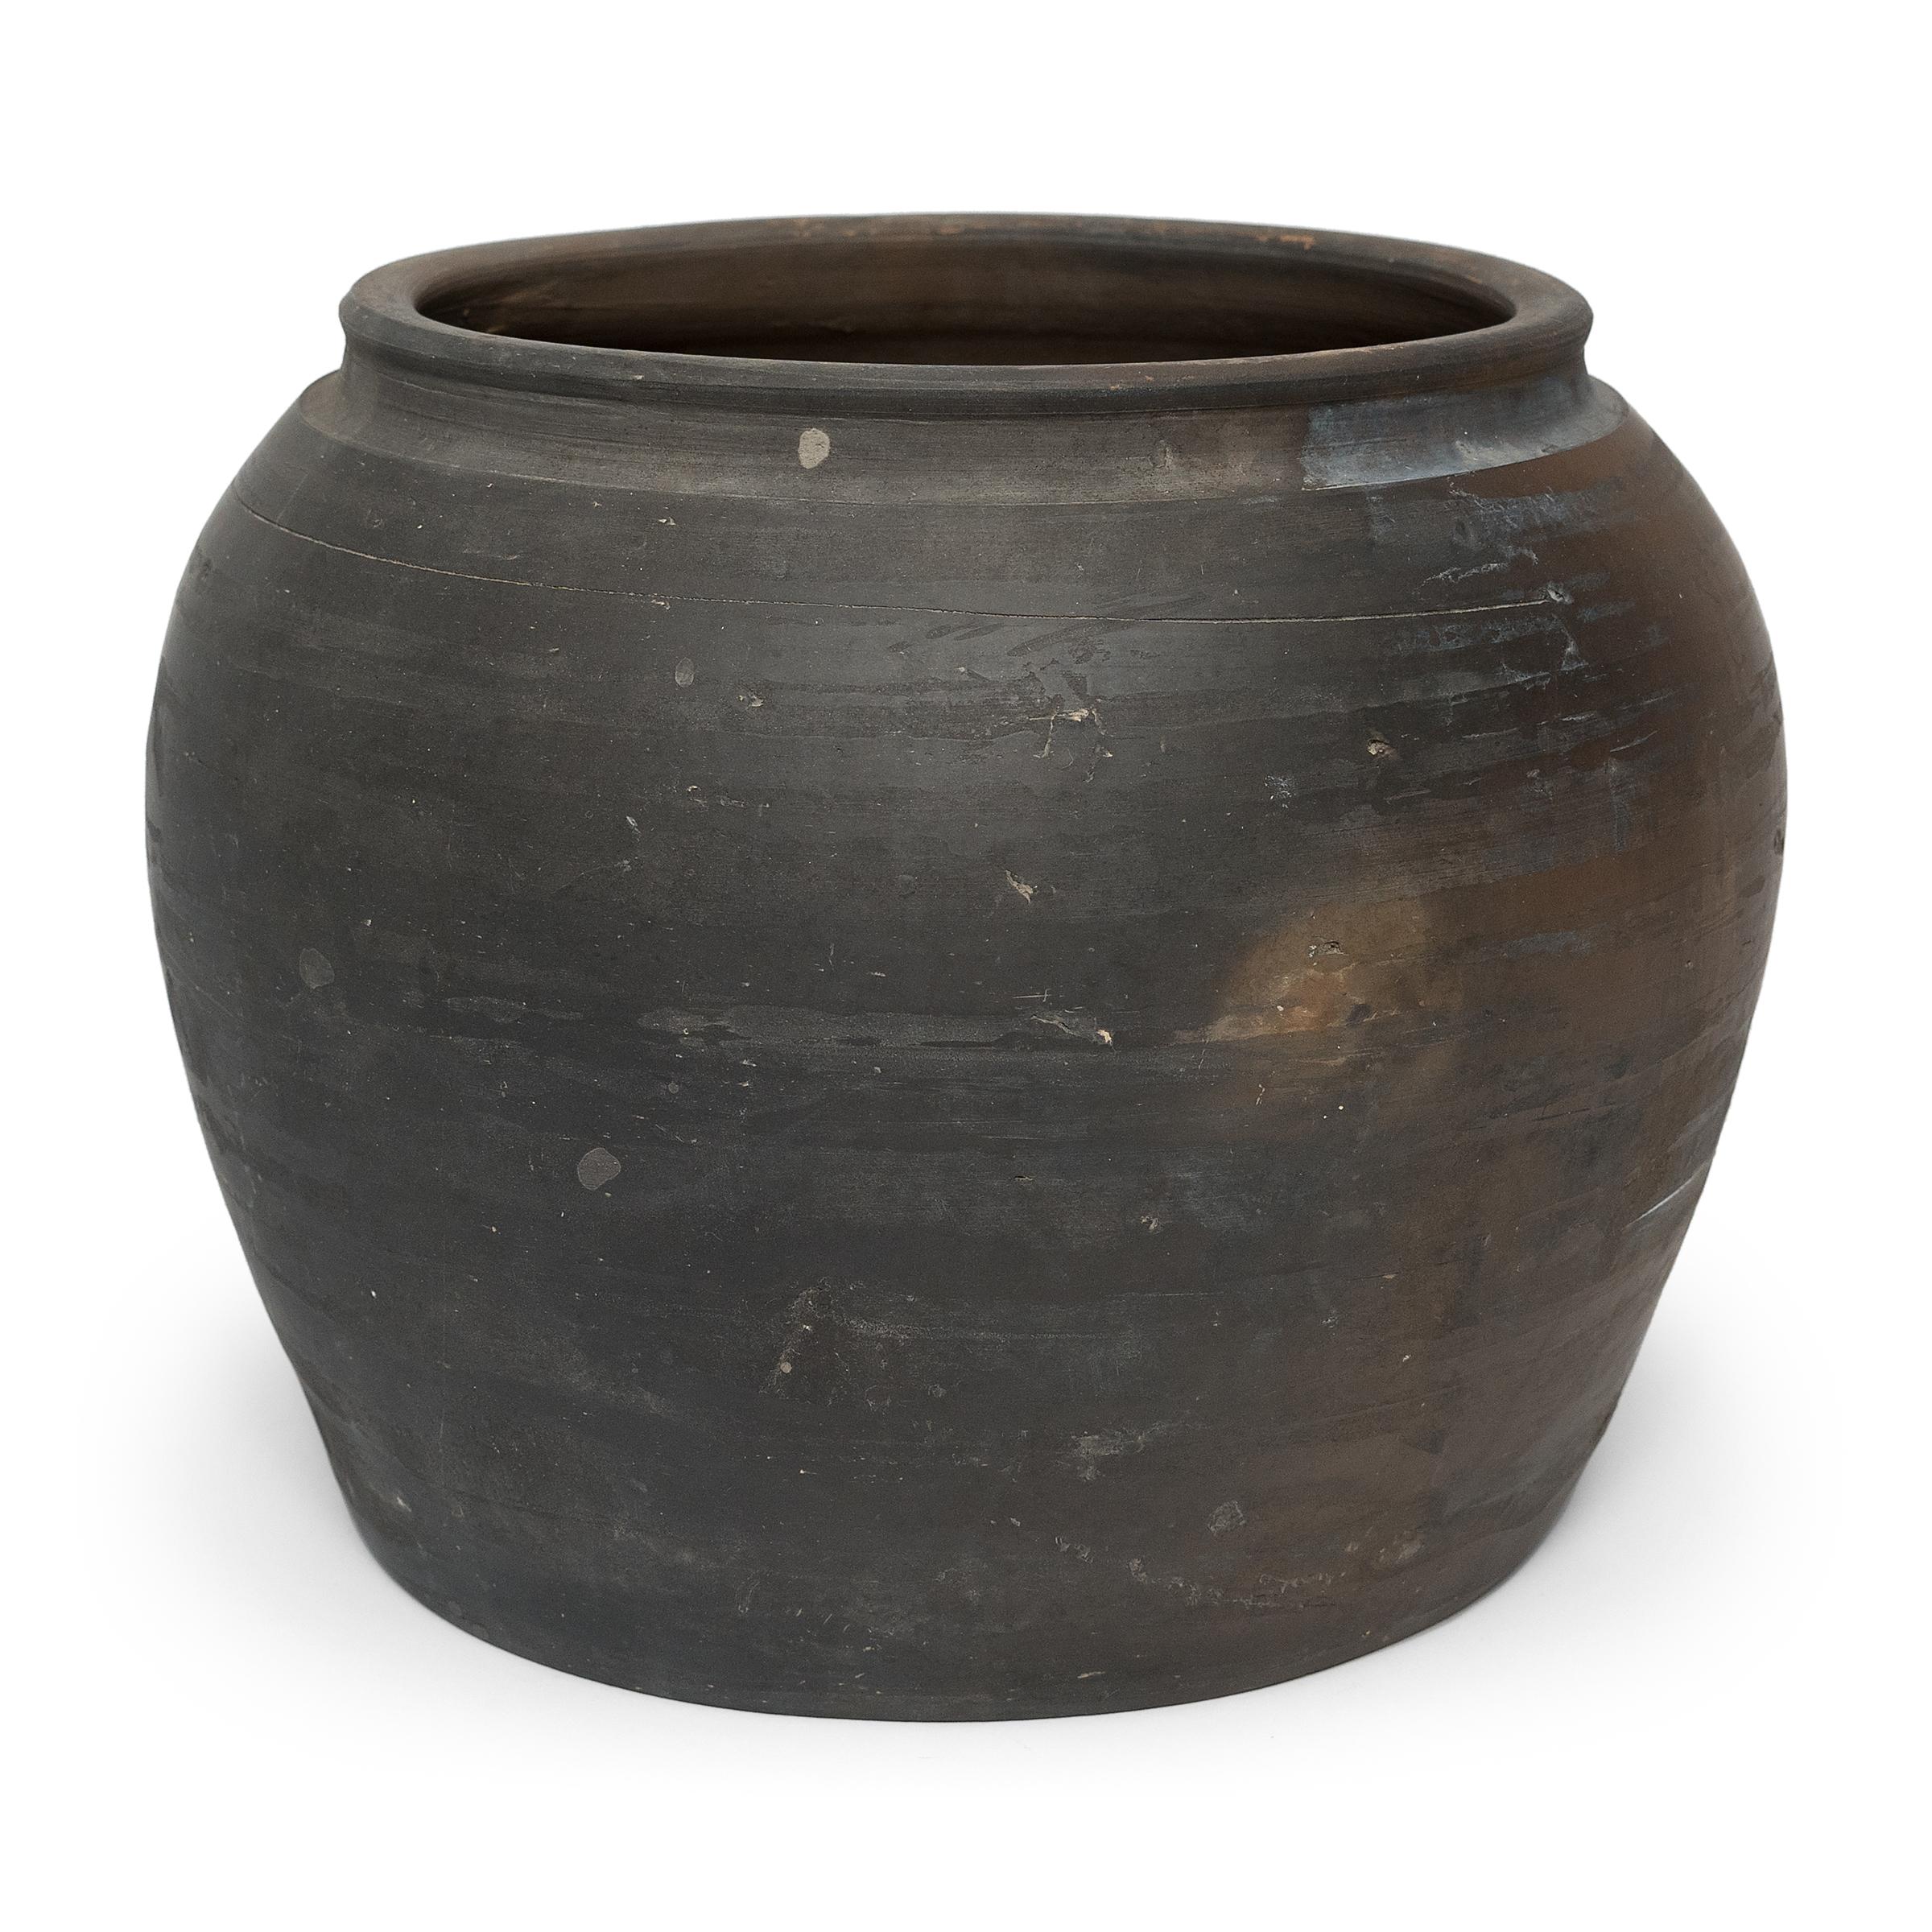 Sculpted by artisans in China's Shanxi province, this vessel has a smoky black exterior on one side that transitions into a golden brown on the other. The squat clay vessel has a quiet simplicity, shaped with balanced proportions and an undecorated,